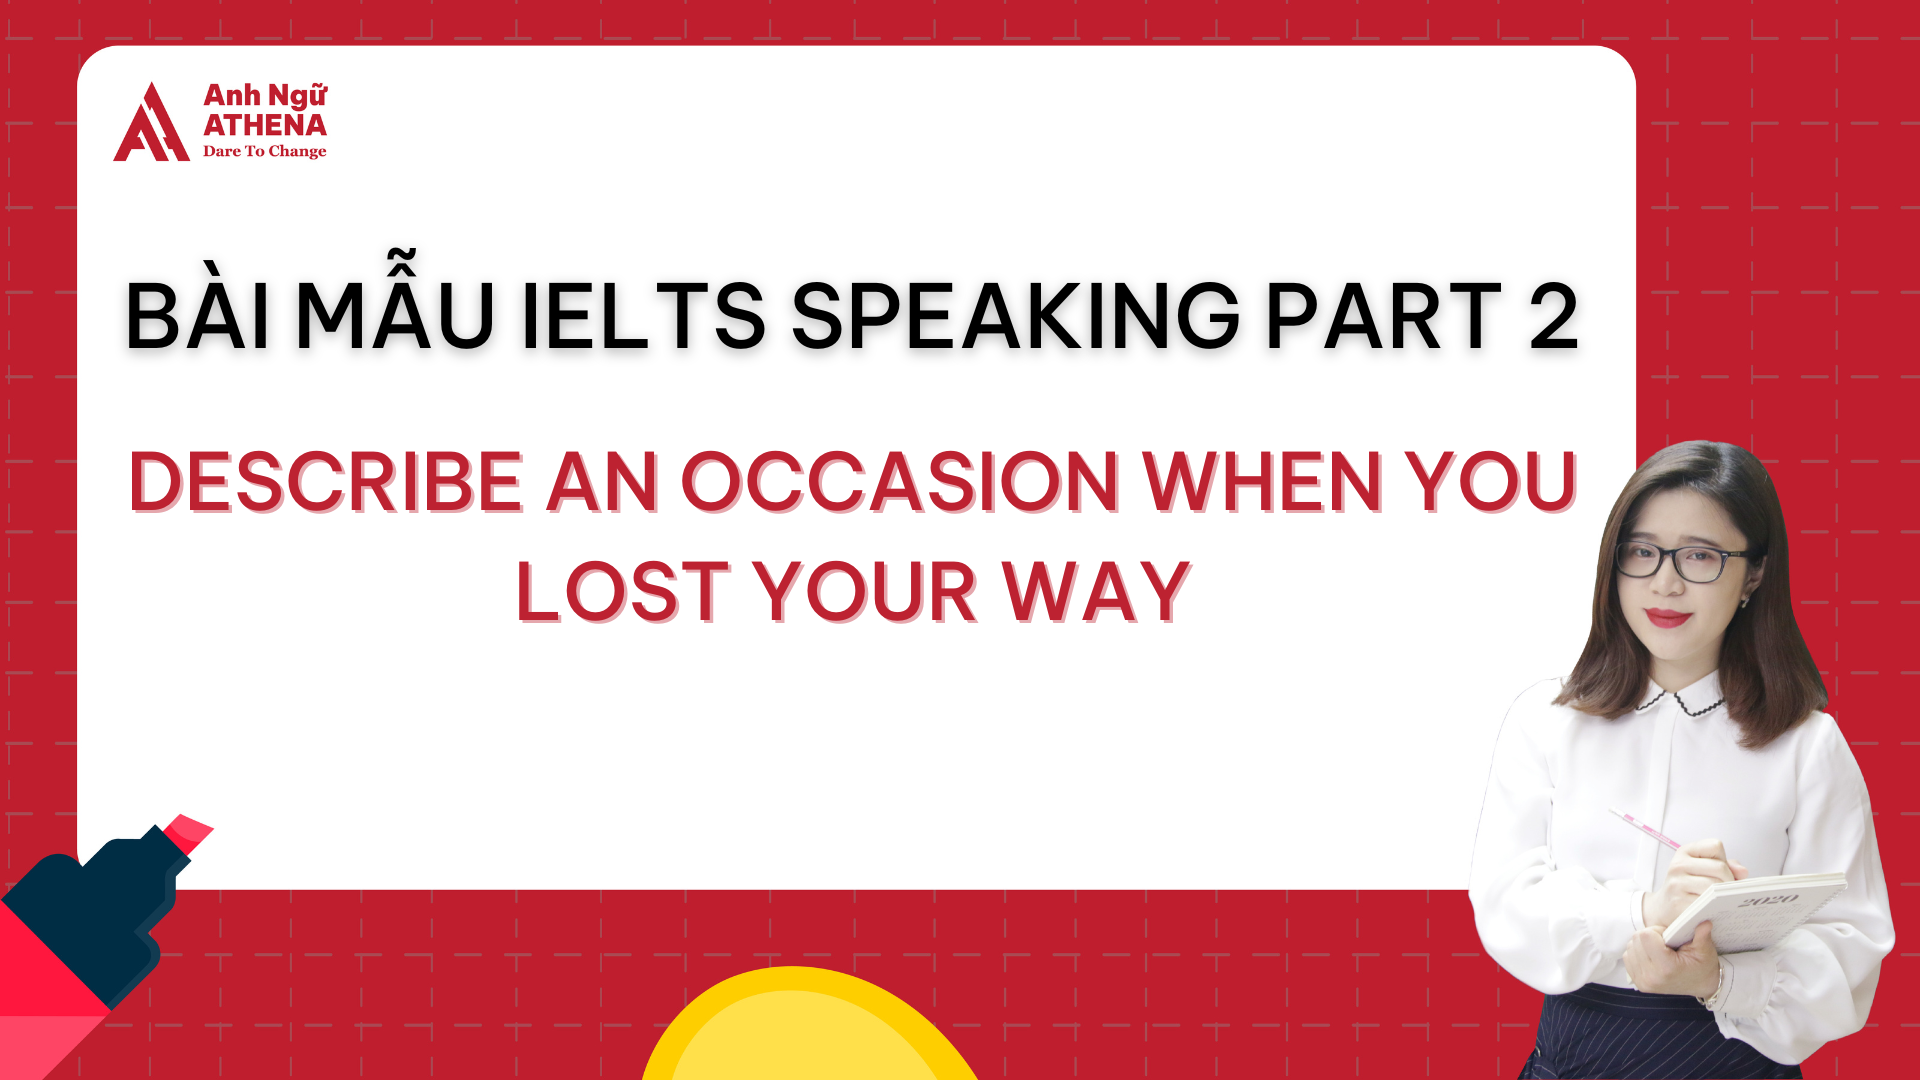 Bài mẫu IELTS Speaking Part 2 - Topic: Describe an occasion when you lost your way